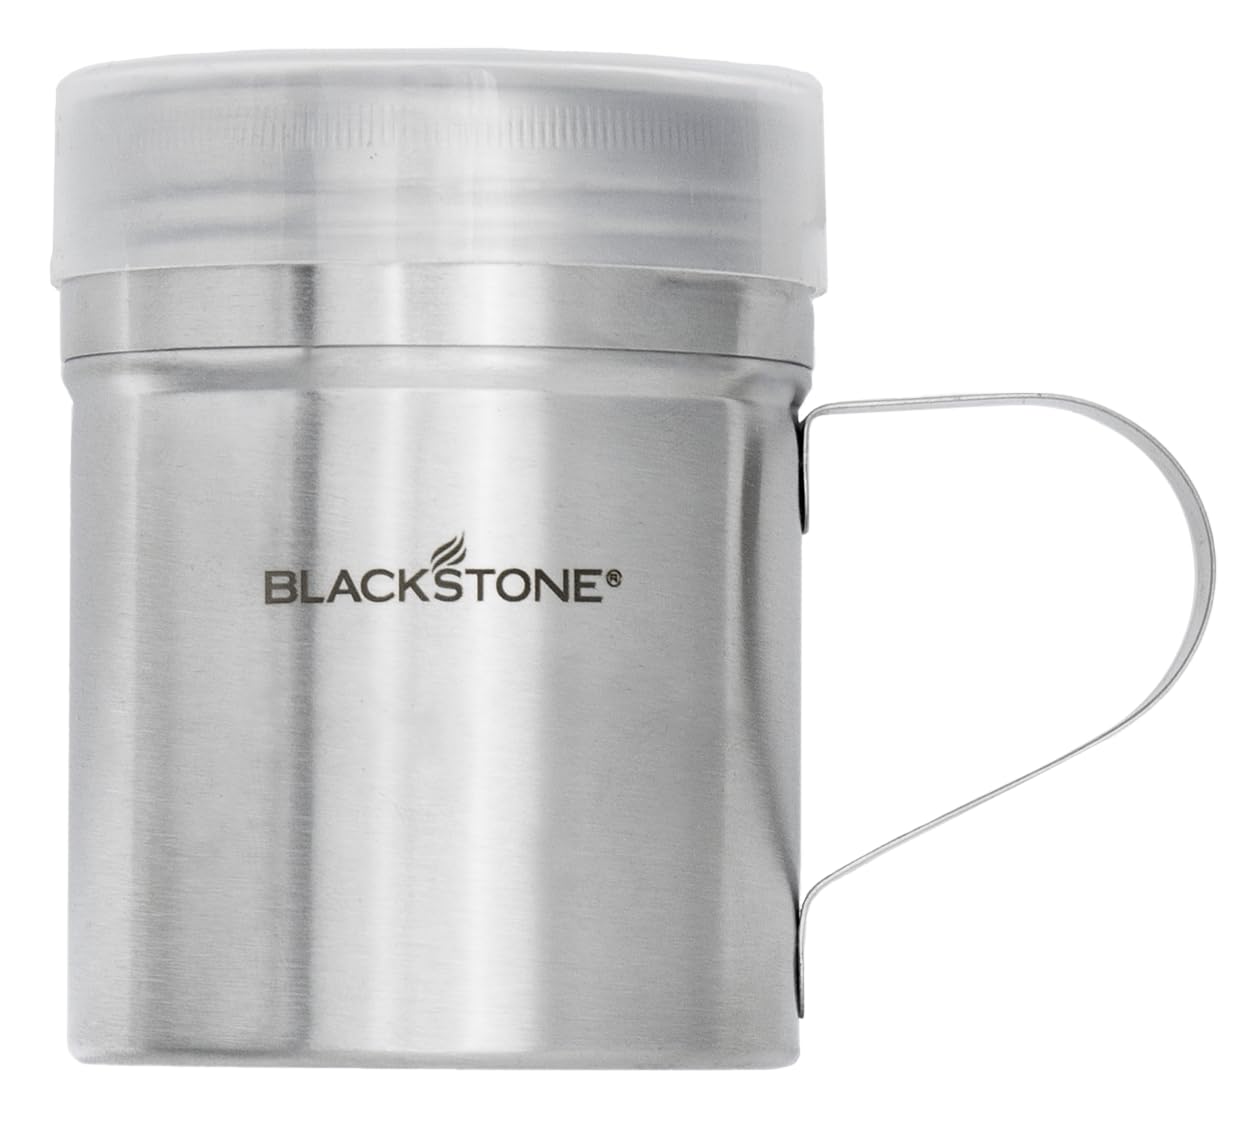 Blackstone 5072 10 Oz Stainless Steel Handle 2 Pack Versatile Dredge Shaker with Lid for Sugar, Cinnamon, Pepper, Salt, Seasonings, Spice Can Container Tins for Home, Café, Restaurant